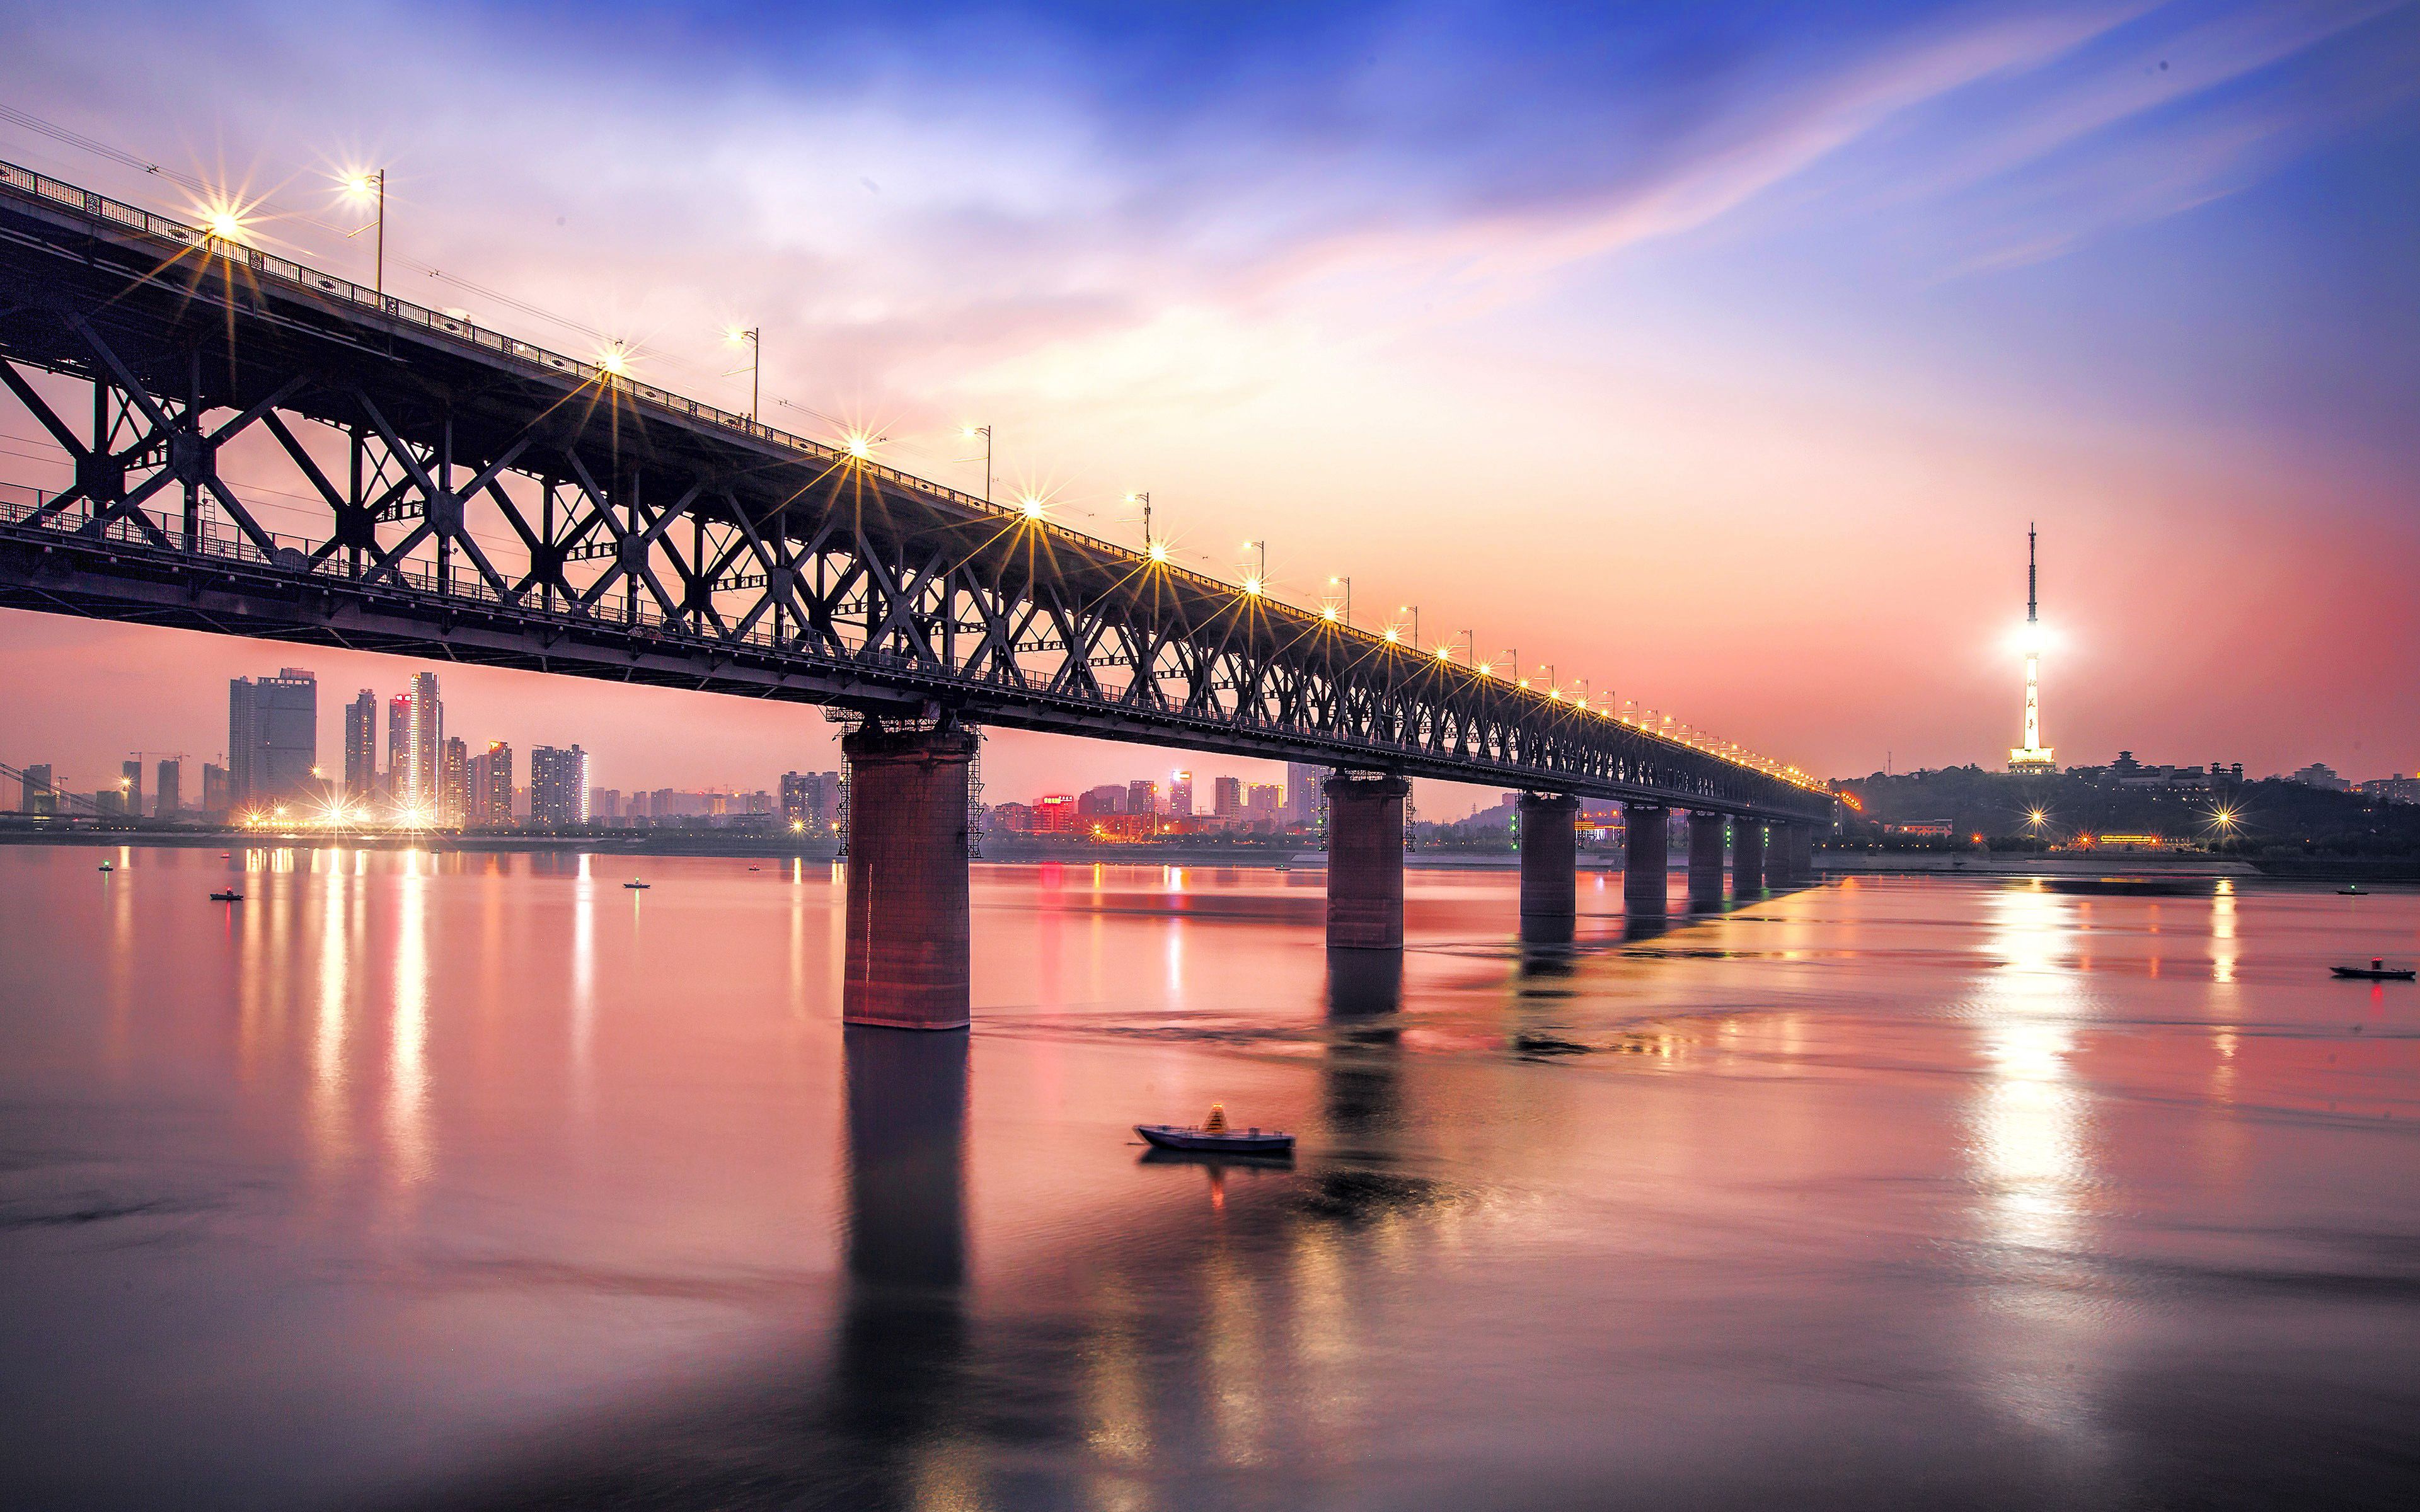 Download wallpaper Wuhan First Yangtze Bridge, 4k, sunset, The Wuhan Yangtze Great Bridge, Yangtze River, Wuhan, China, Asia for desktop with resolution 3840x2400. High Quality HD picture wallpaper